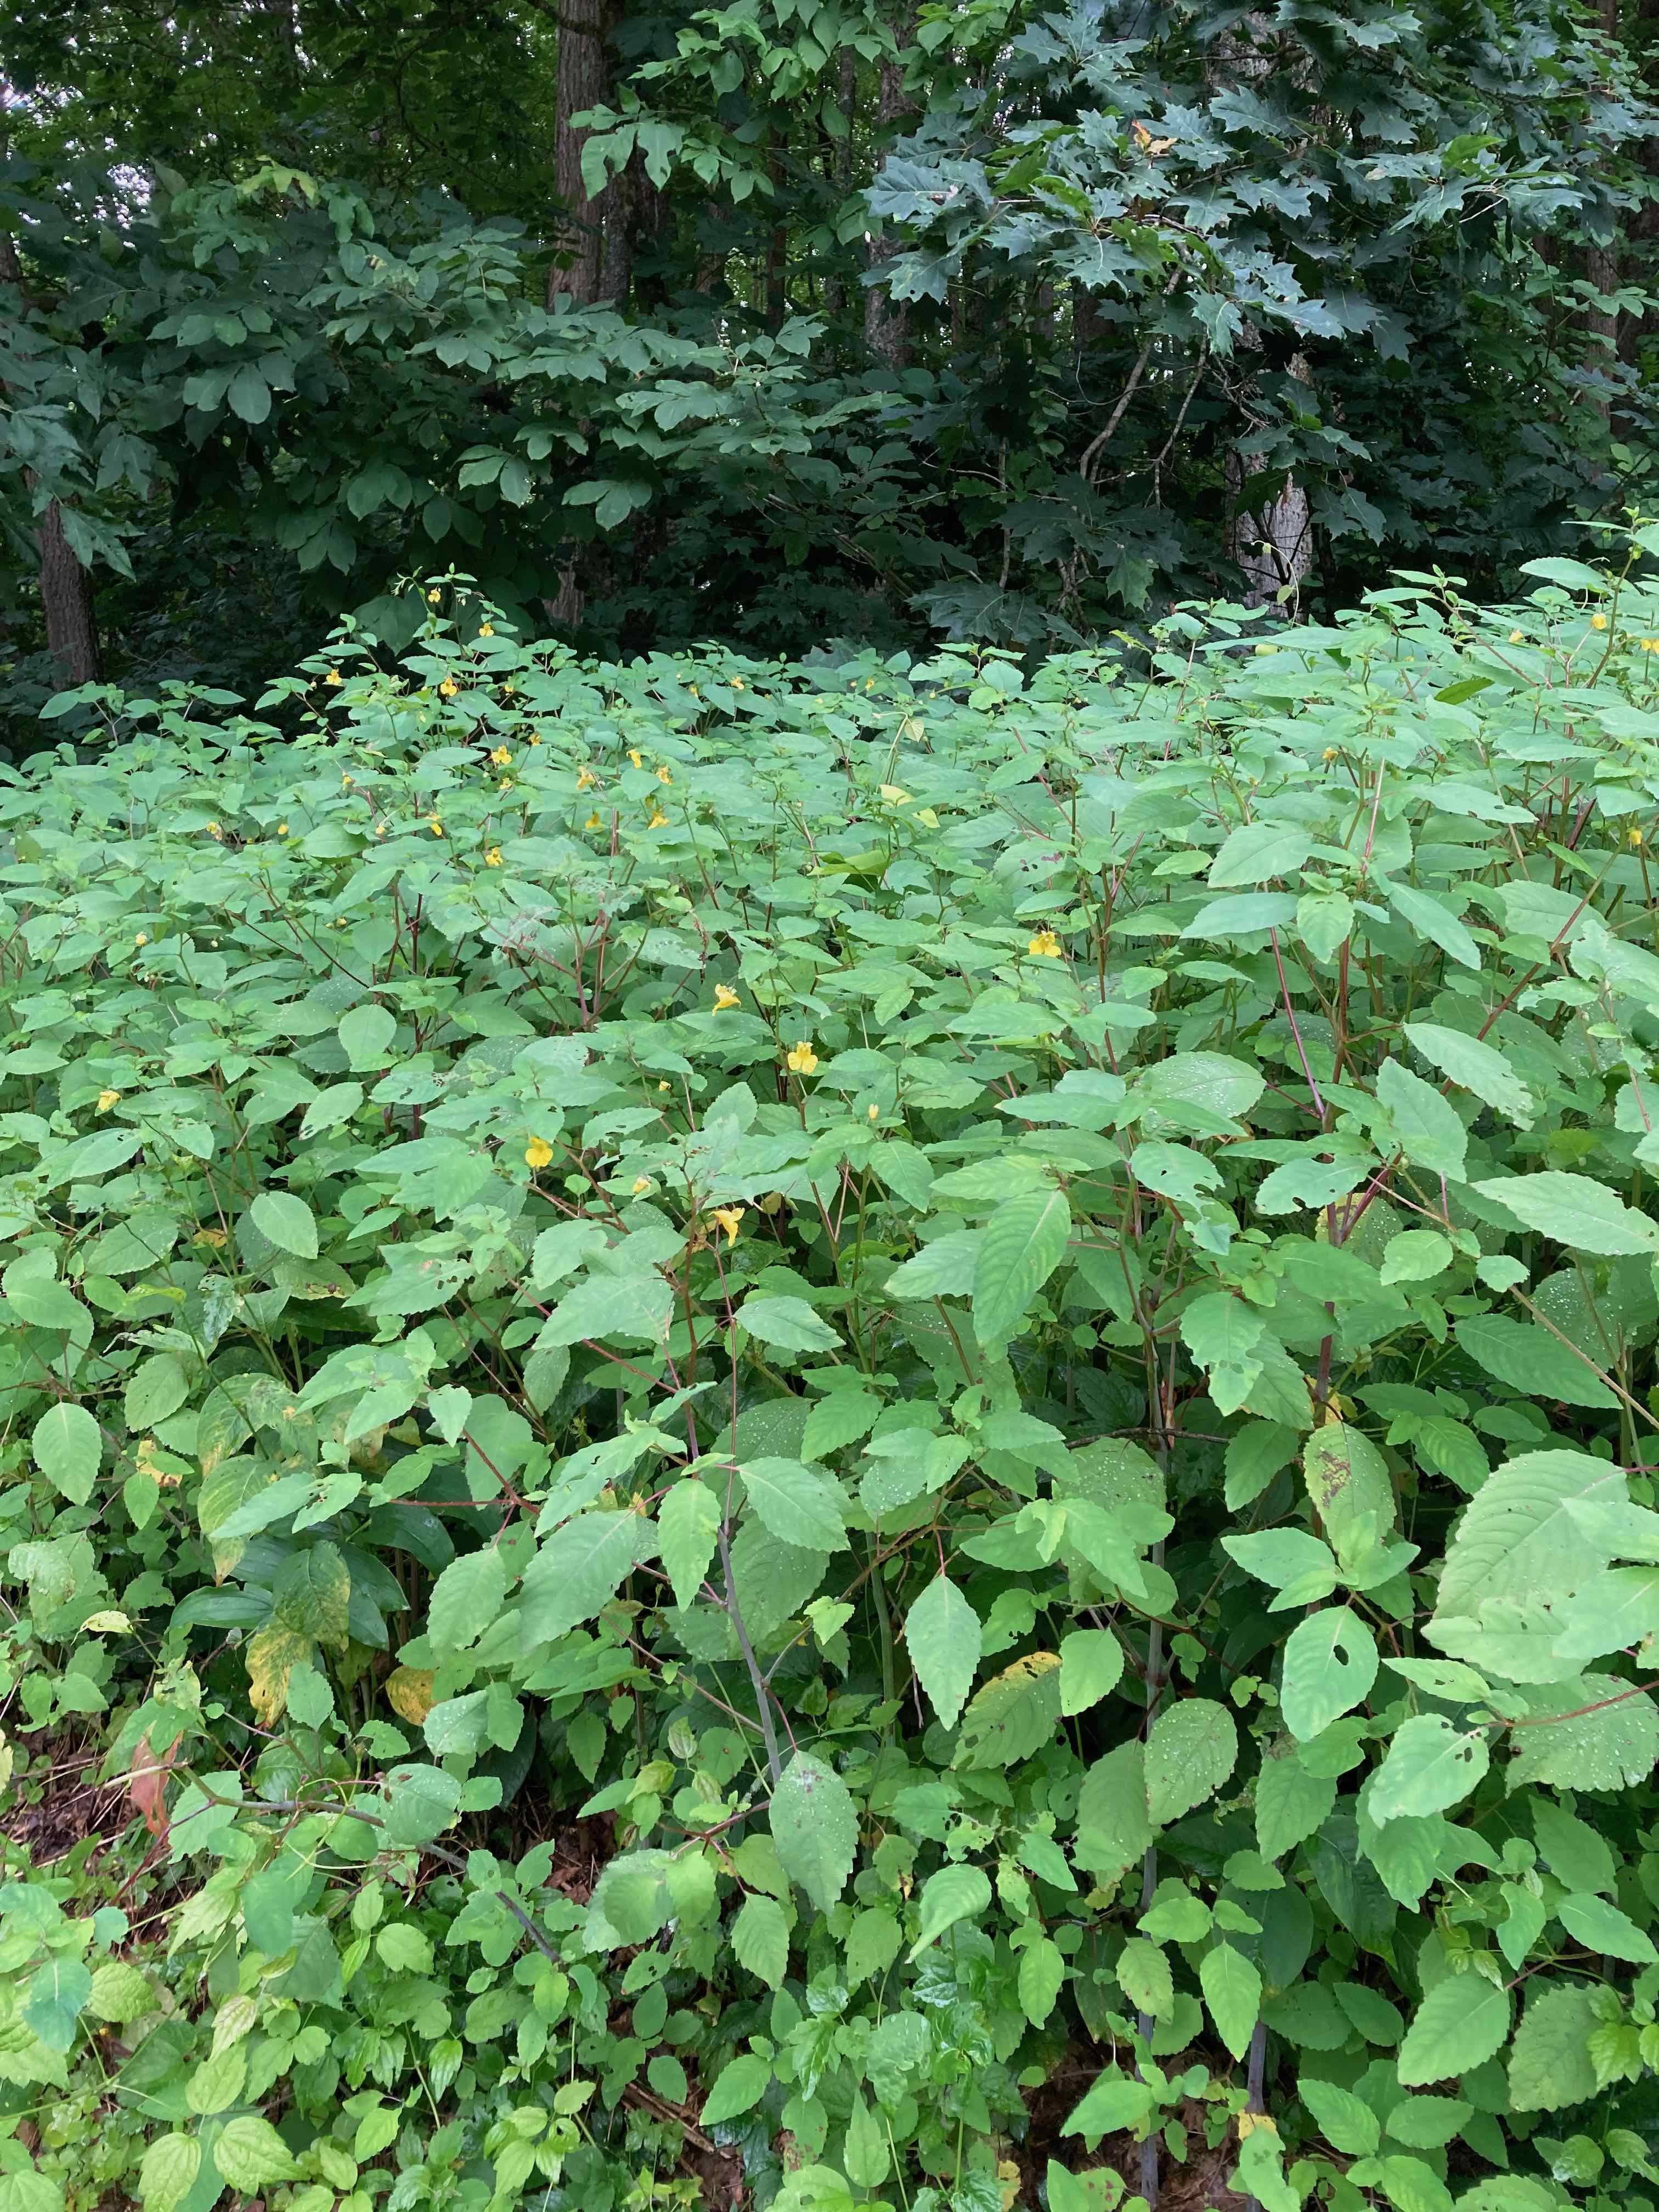 The Scientific Name is Impatiens pallida. You will likely hear them called Yellow Jewelweed, Yellow Touch-me-not, Pale Touch-me-not. This picture shows the A large patch of <em>Impatiens pallida</em> of Impatiens pallida